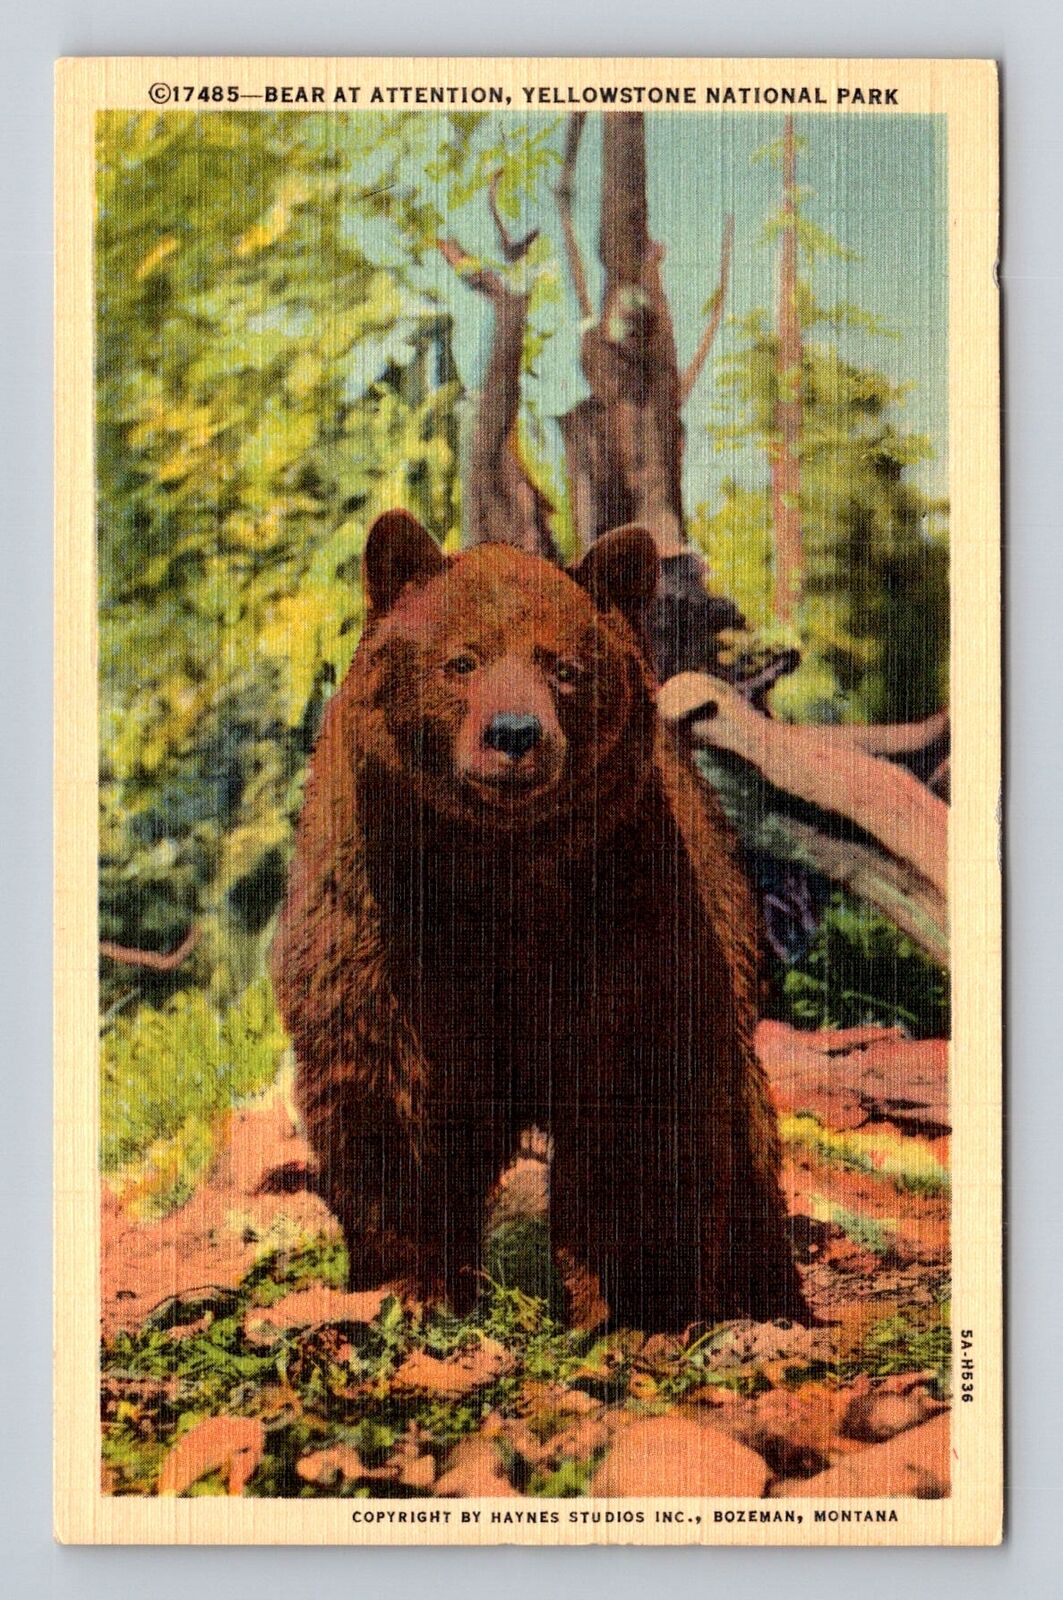 Yellowstone National Park, Bear at Attention, Series #17485 Vintage Postcard